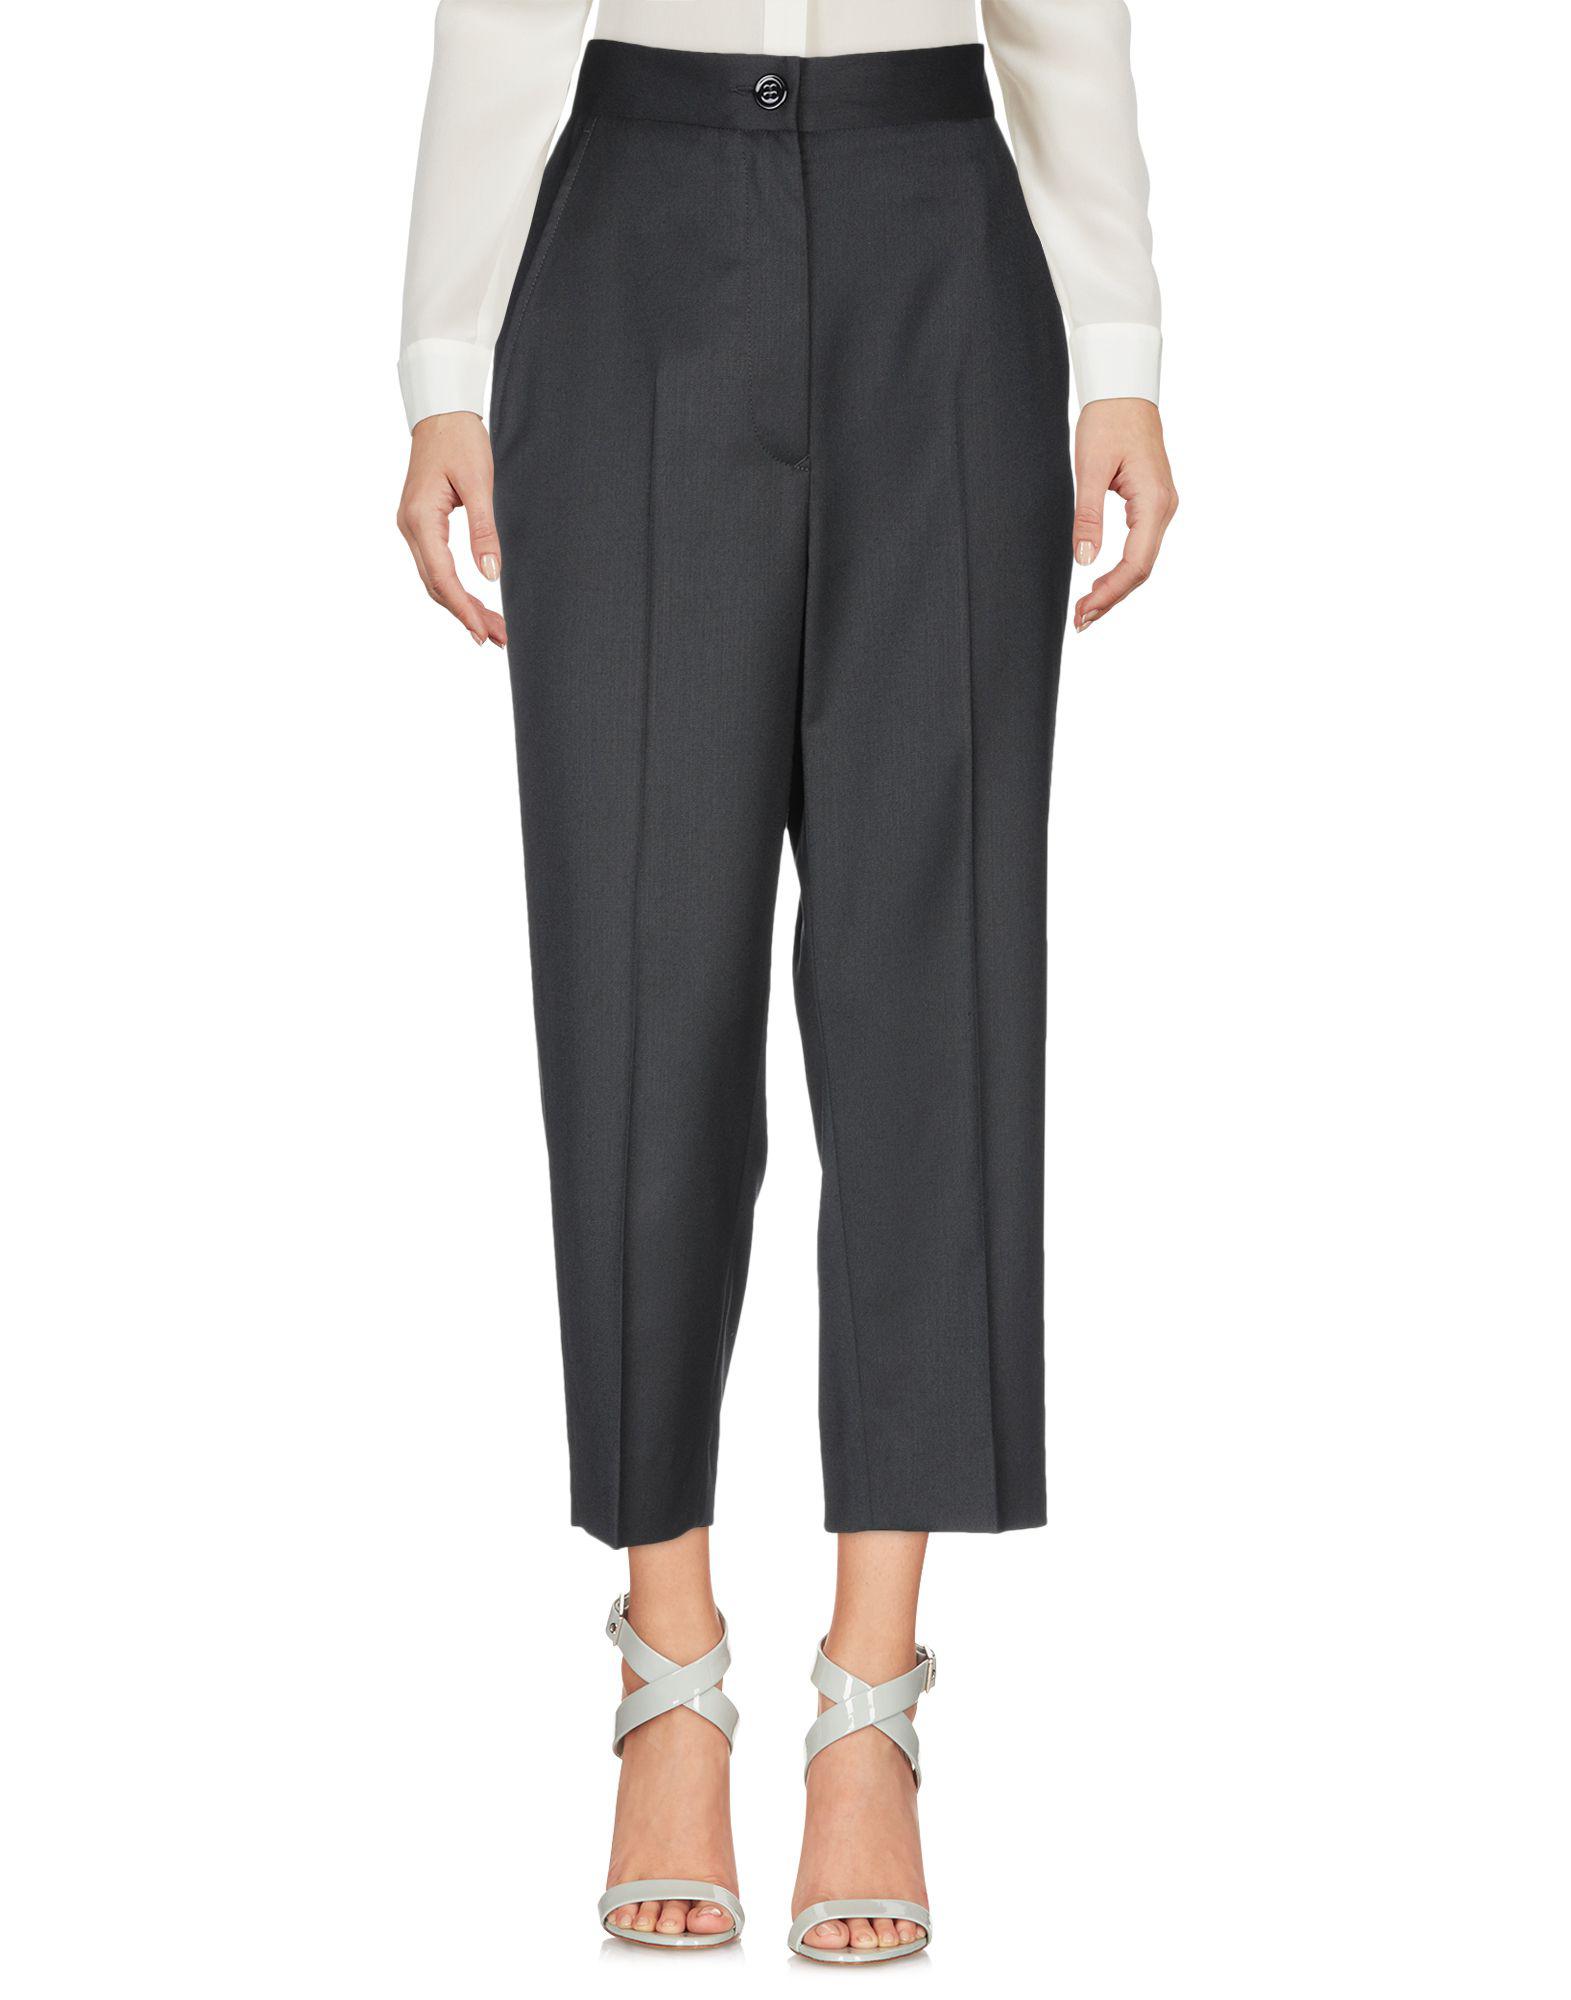 MM6 by Maison Martin Margiela Casual Pants in Black - Lyst